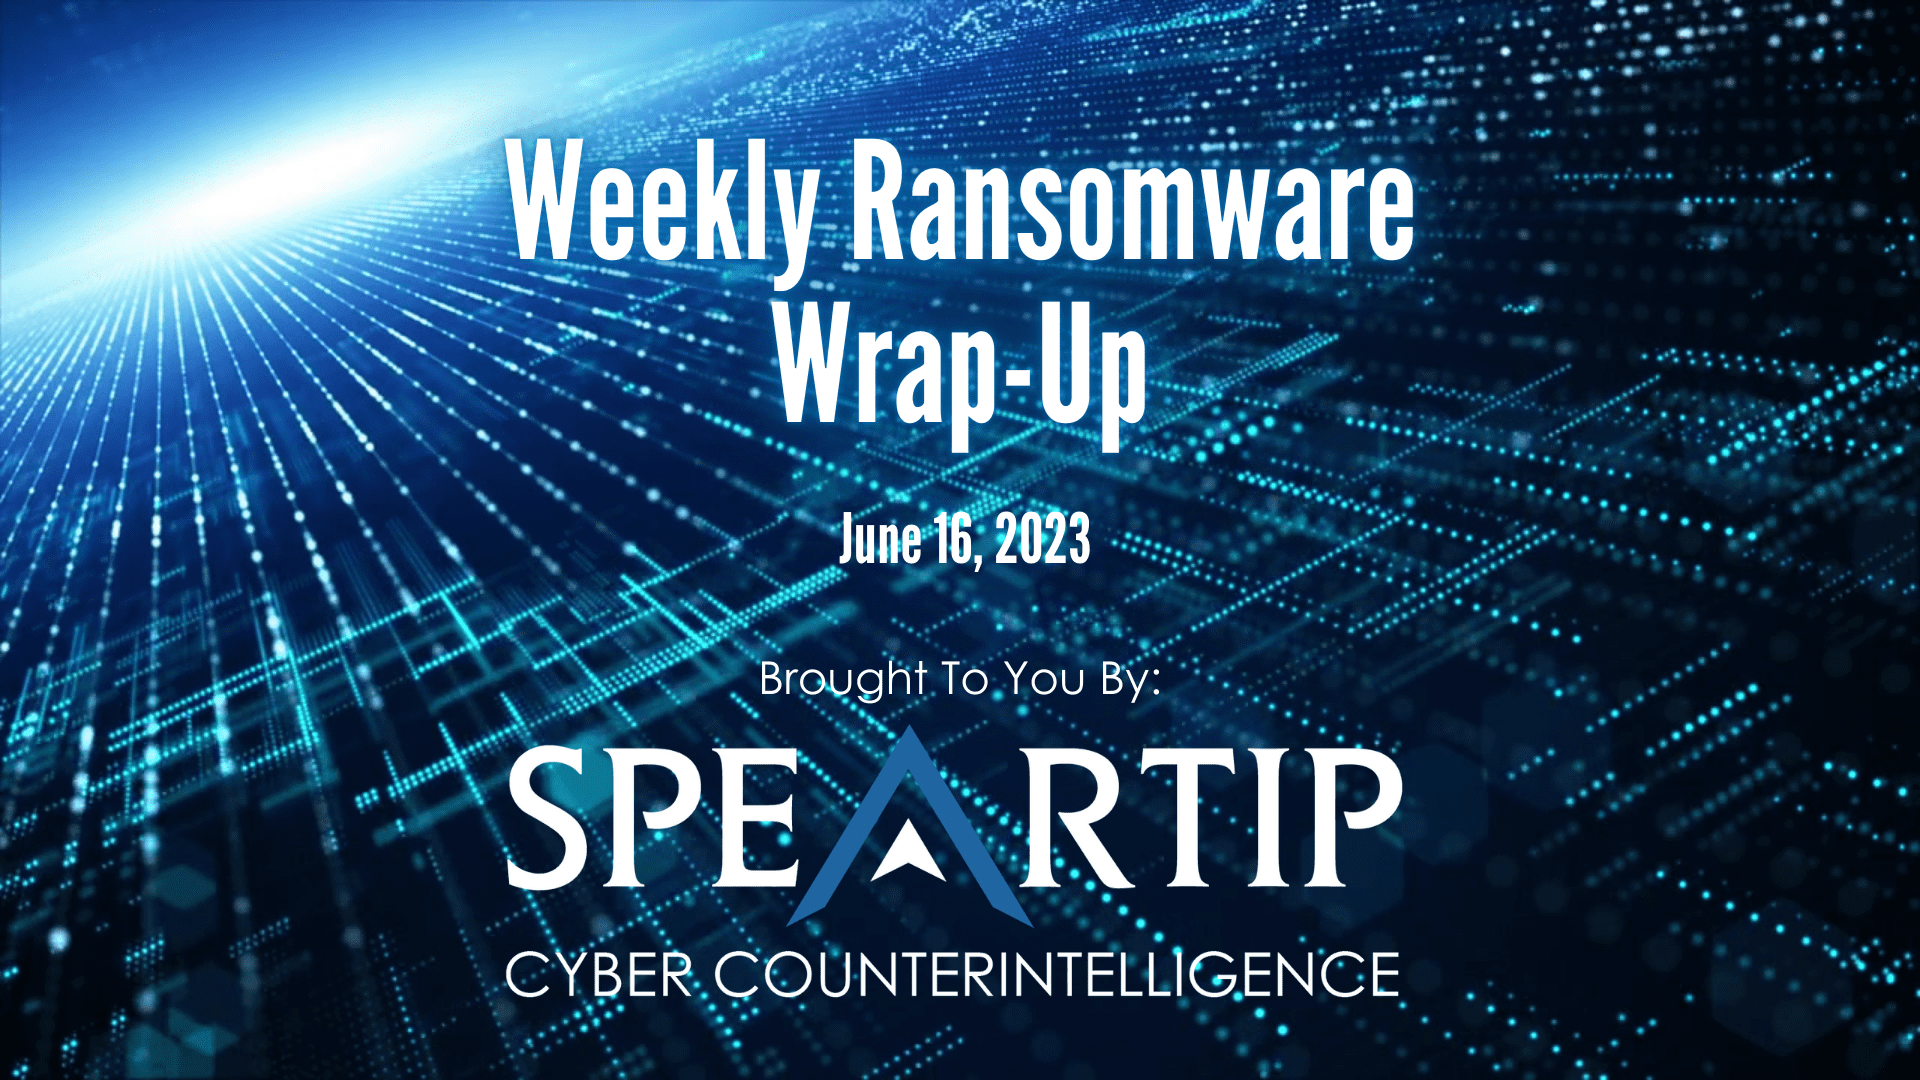 June-16-2023-Weekly Ransomware Wrap-up